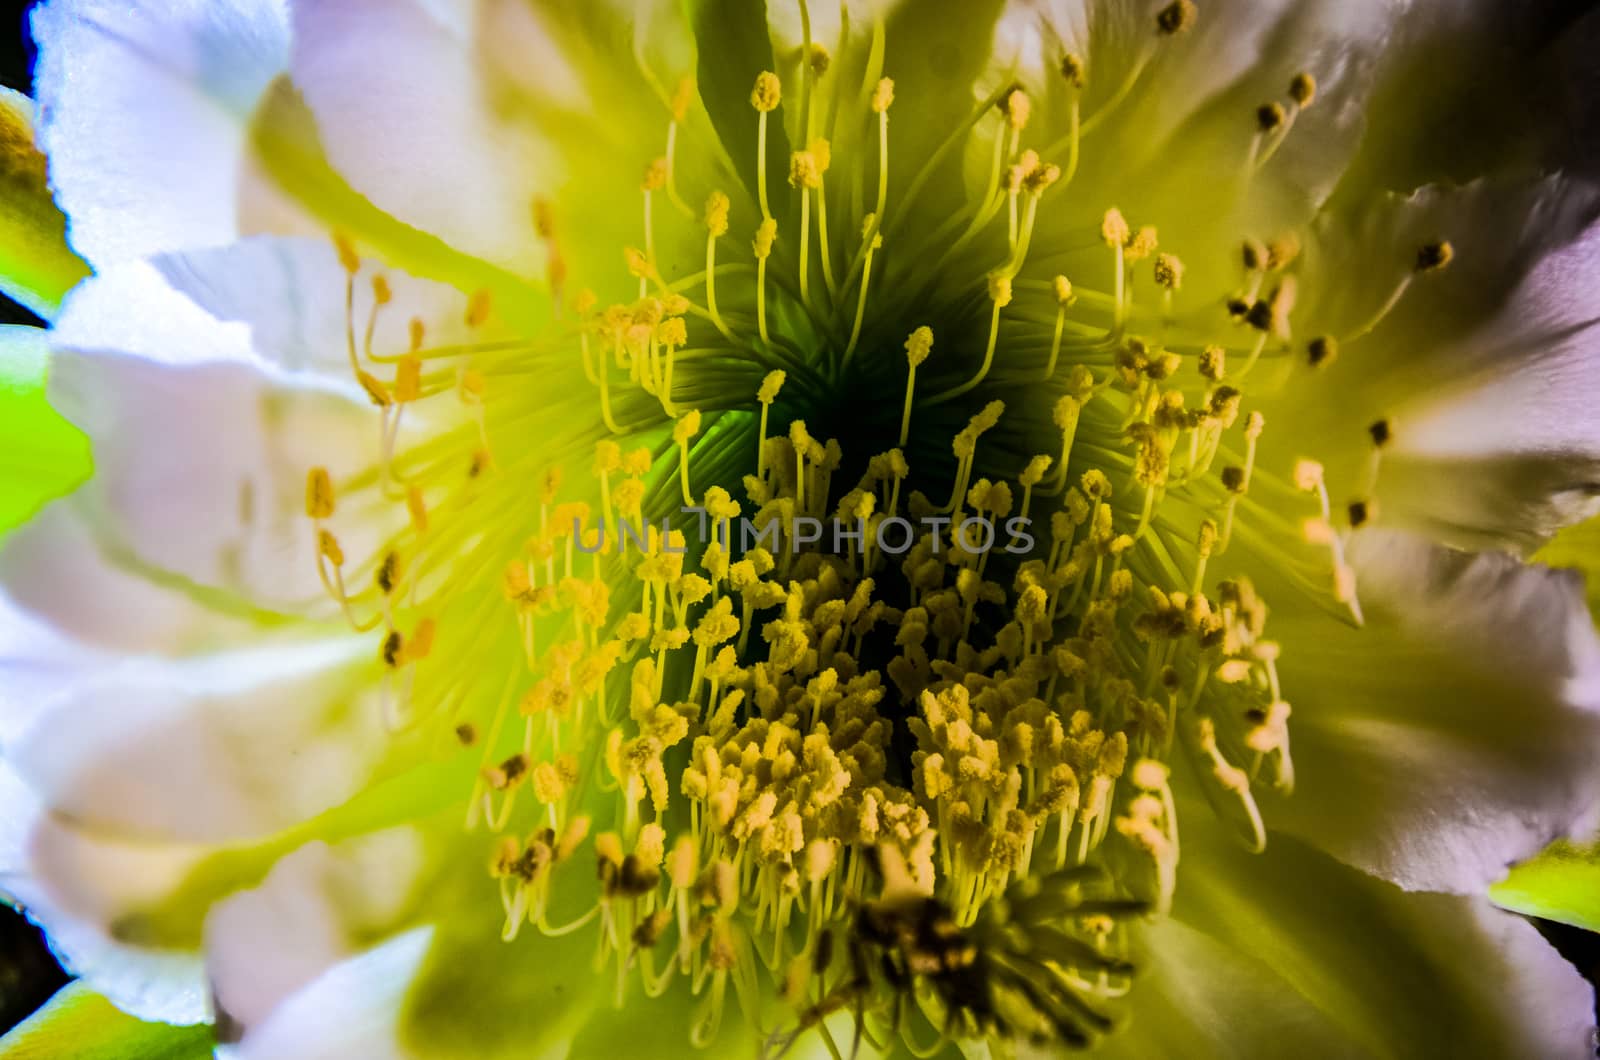 The beautiful large night blooming cereus flower